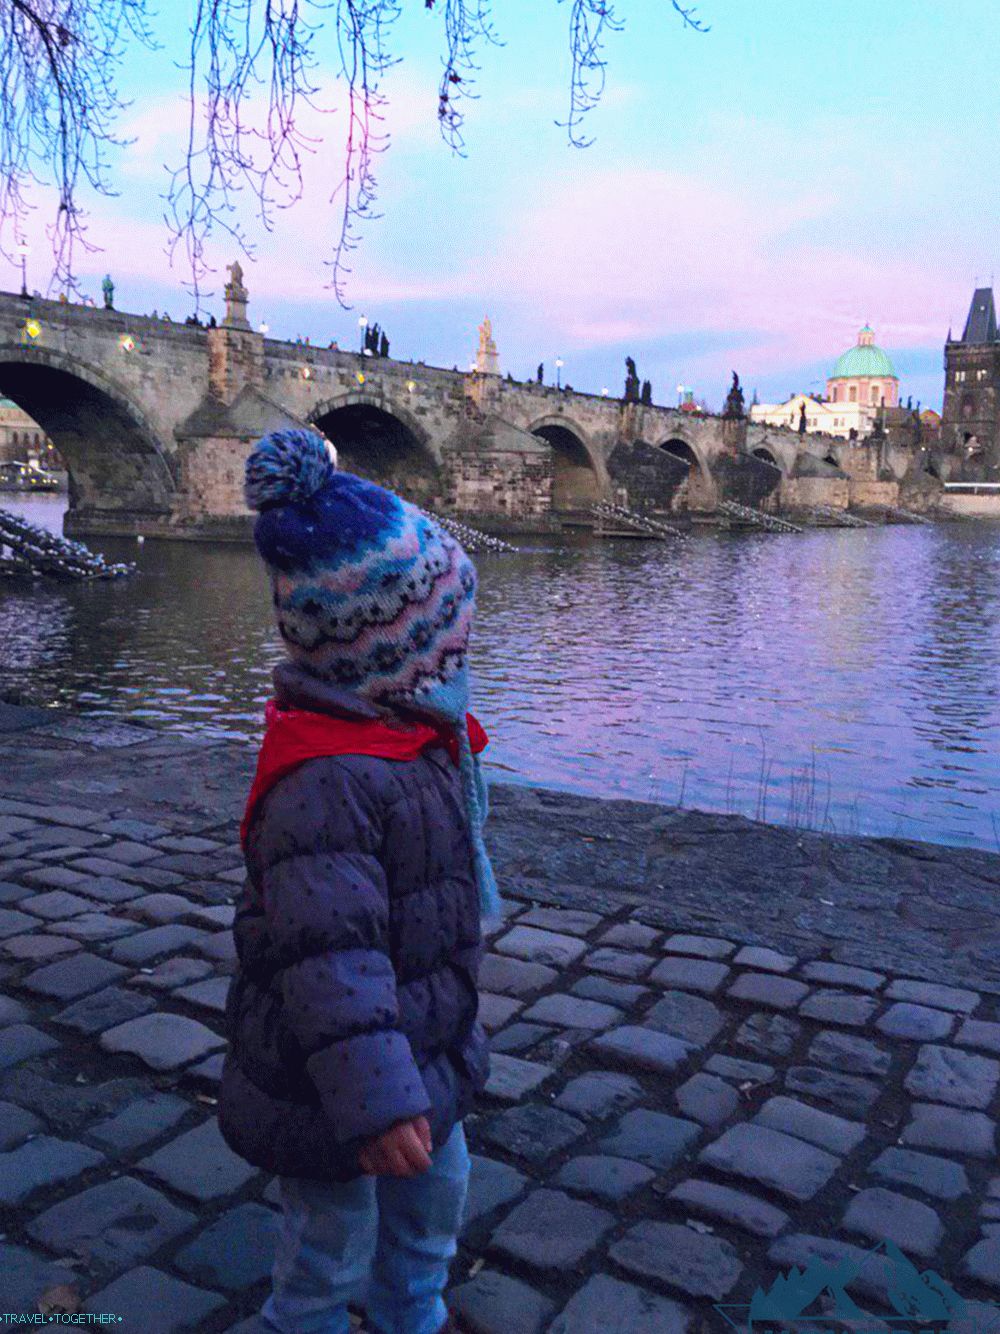 A trip to Prague with a child